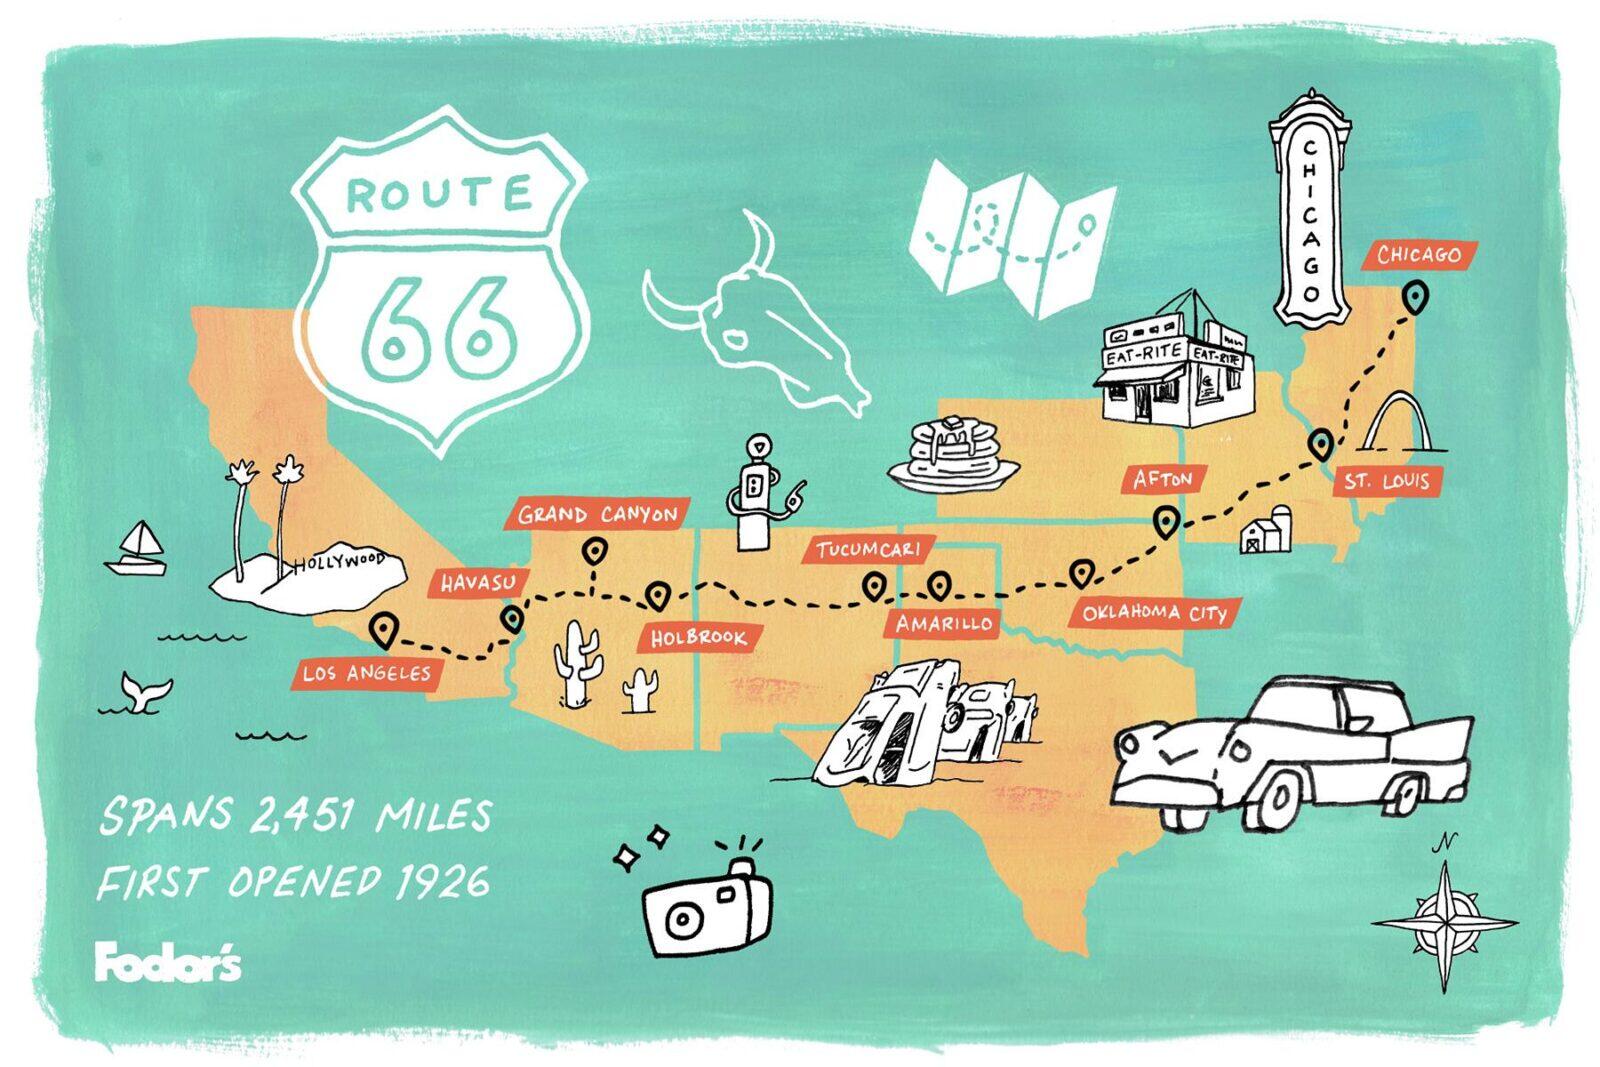 planning a trip along route 66